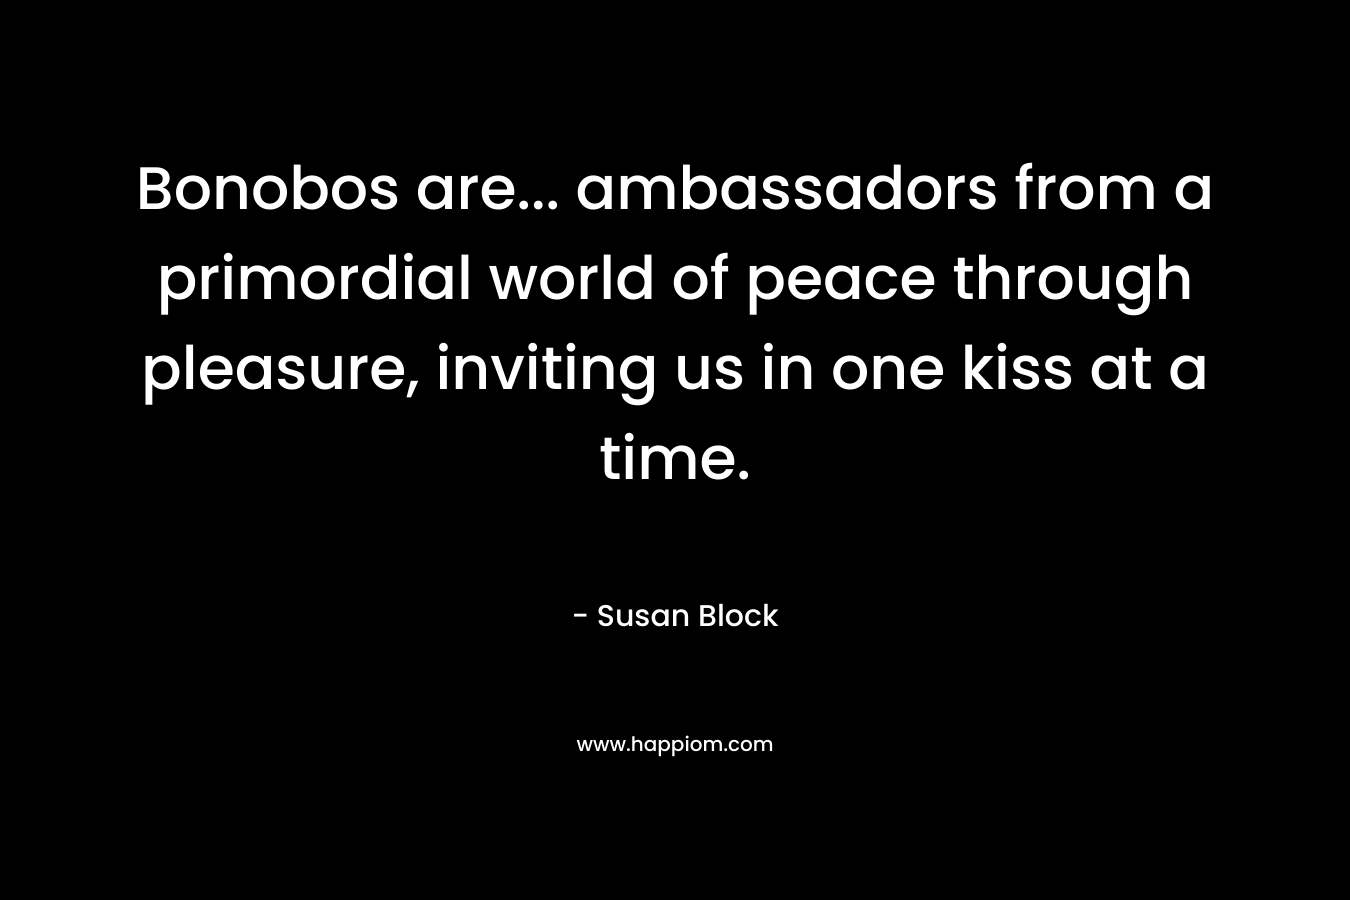 Bonobos are... ambassadors from a primordial world of peace through pleasure, inviting us in one kiss at a time.